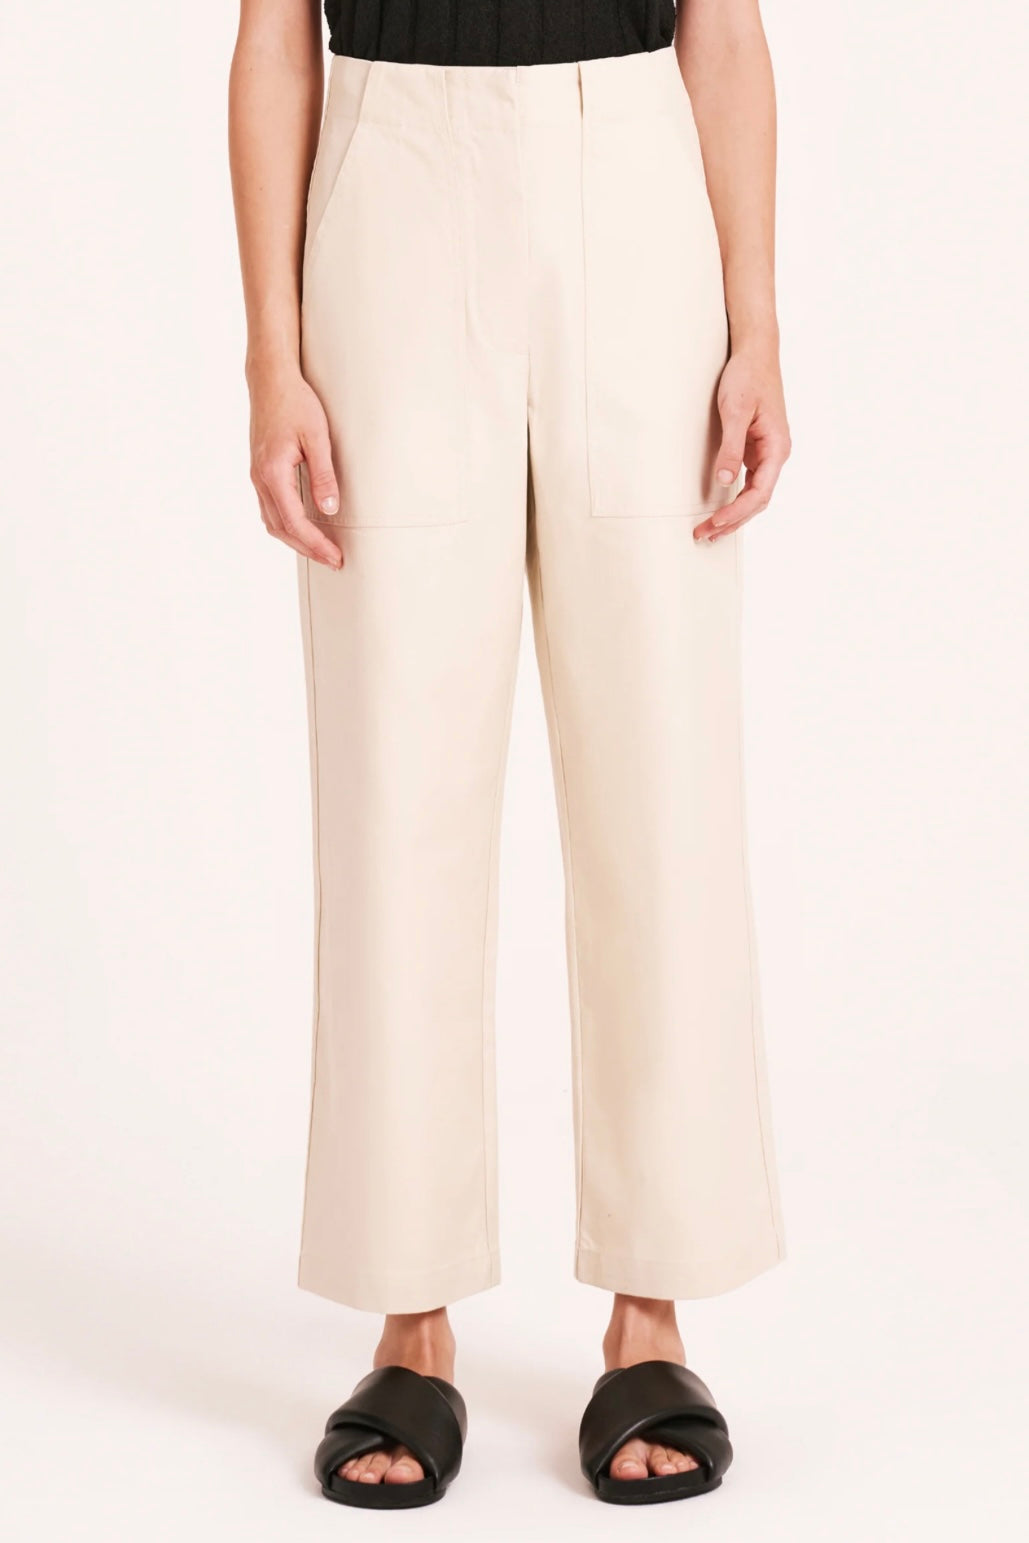 Nude Lucy II BRISA Pant - sand